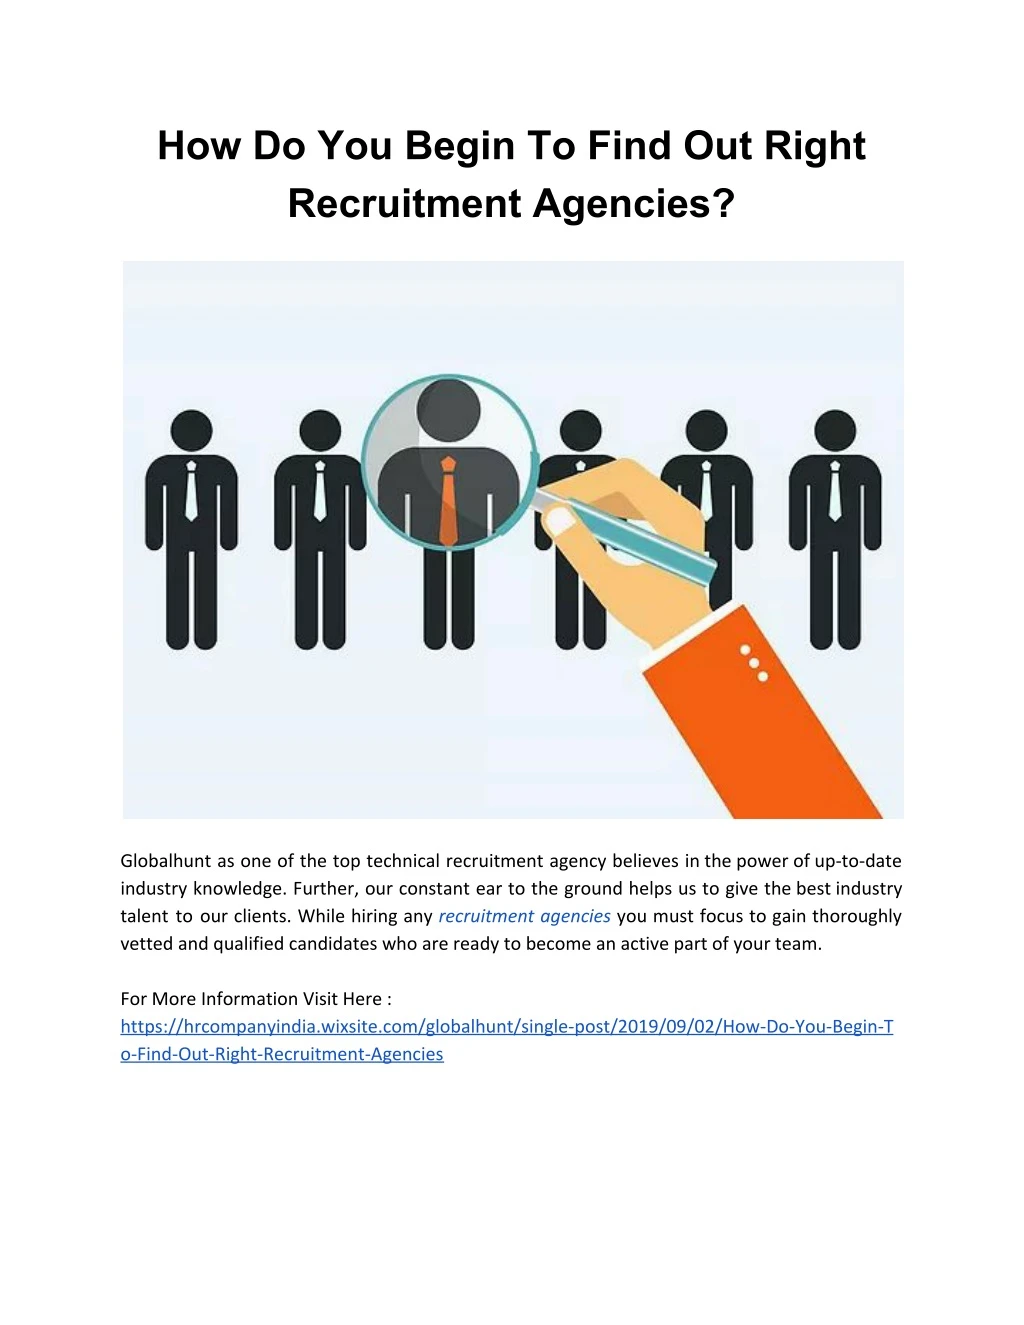 how do you begin to find out right recruitment